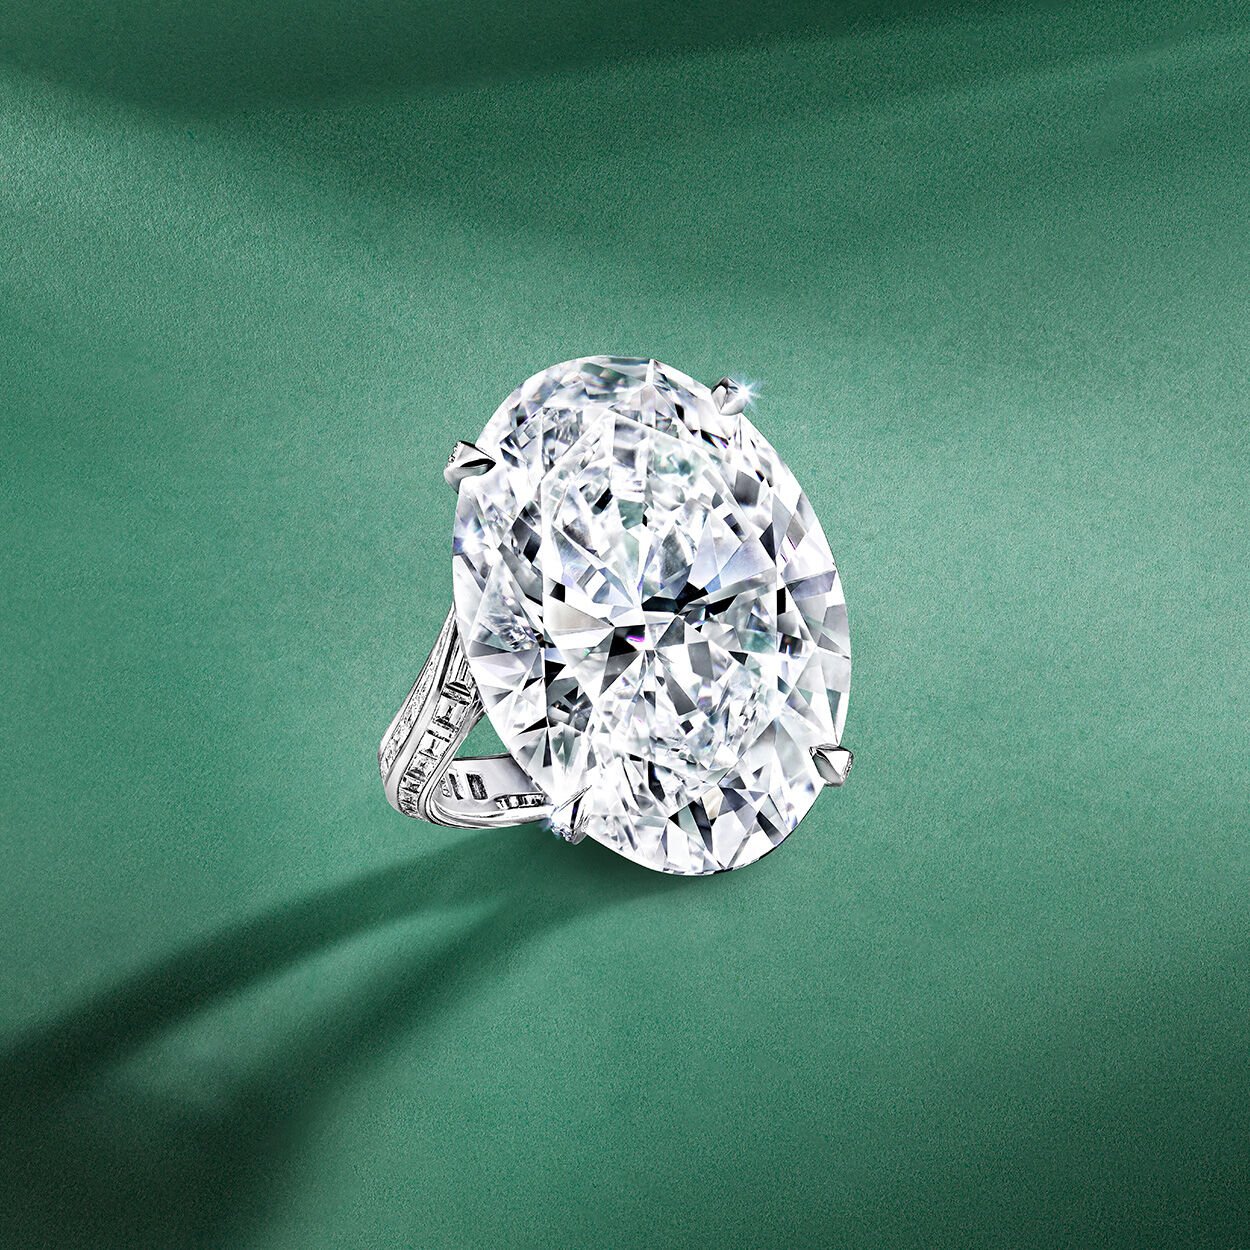 Image of Graff solitaire White Diamond Oval Shape engagement ring.